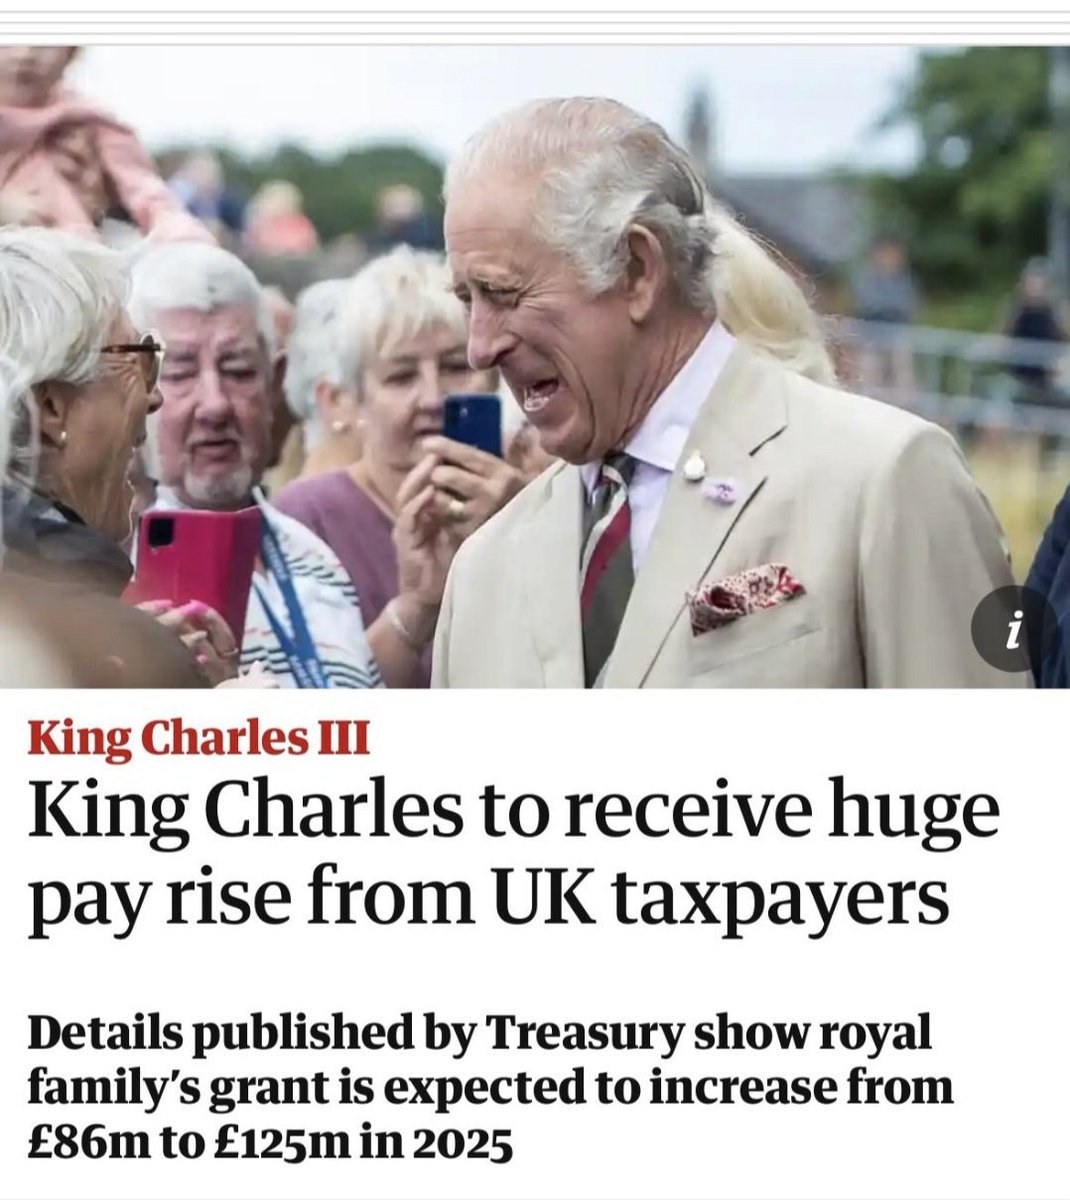 The RF sorry doctors and other public sector workers we can’t afford to give you a pay rise above 6% but we can afford to give 45% to the RF who didn’t pay a single penny in inheritance tax and don’t really need such a rise. Takers not givers. #AbolishTheMonarchy